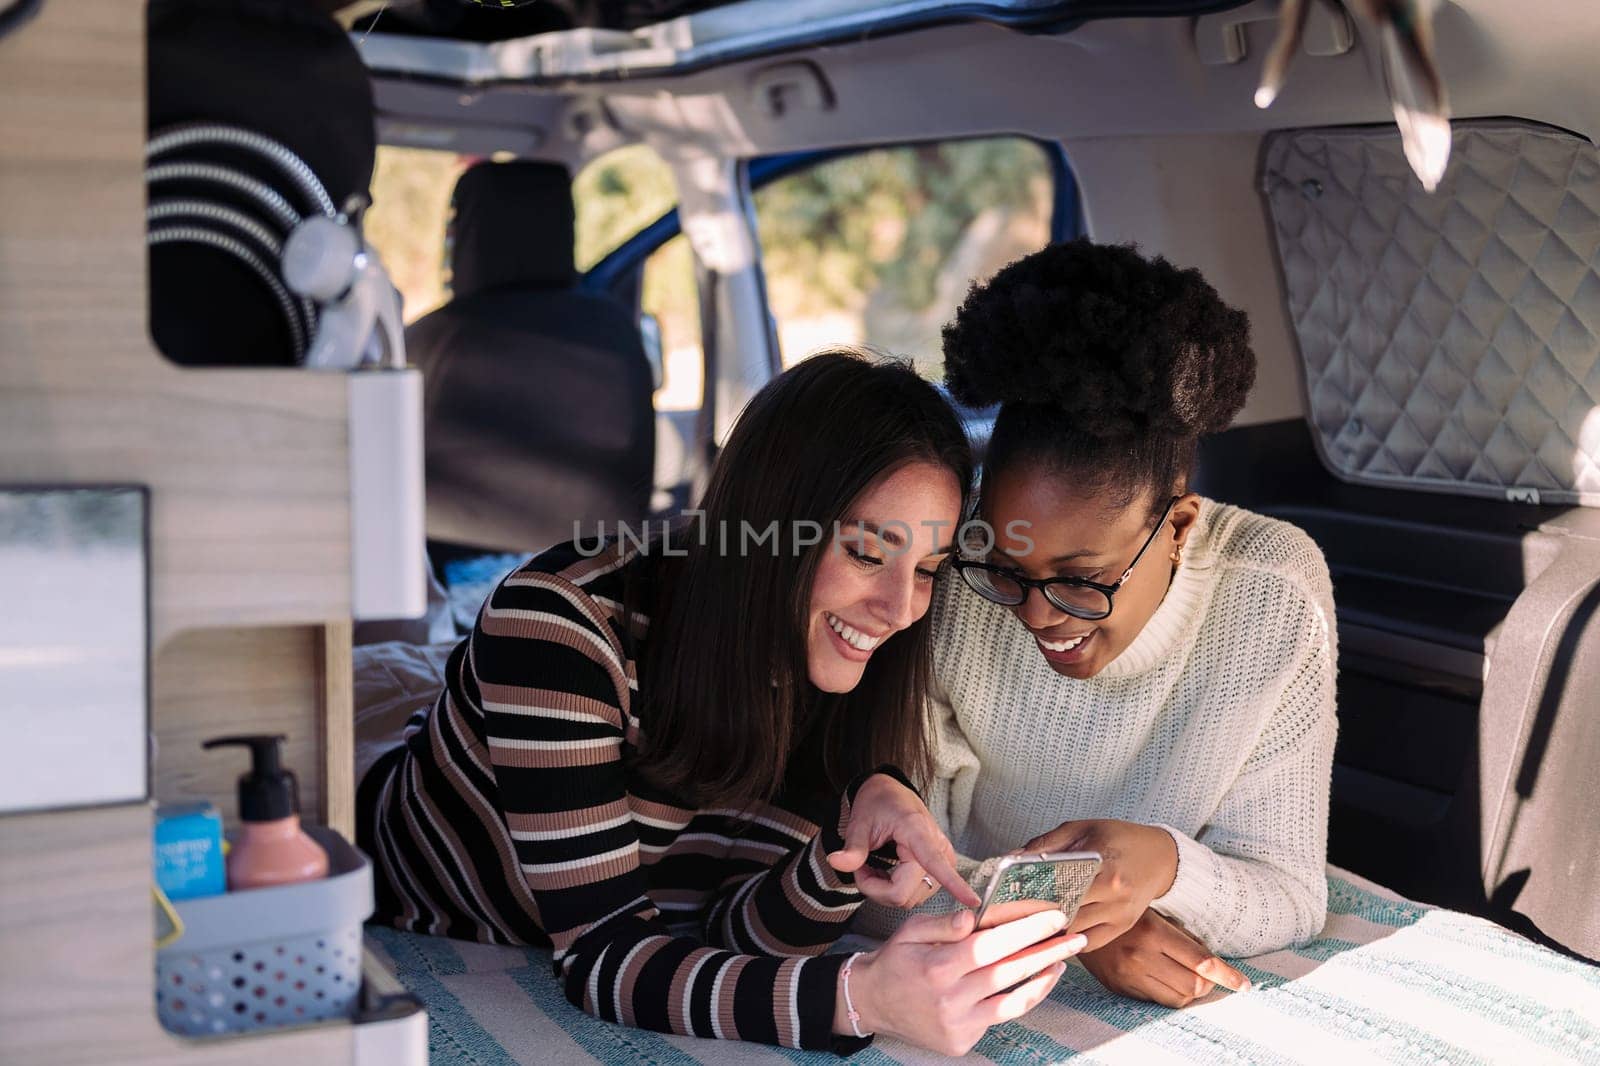 two young women smiling happy and enjoying with mobile phone in camper van, concept of nomadic lifestyle and van life relaxation